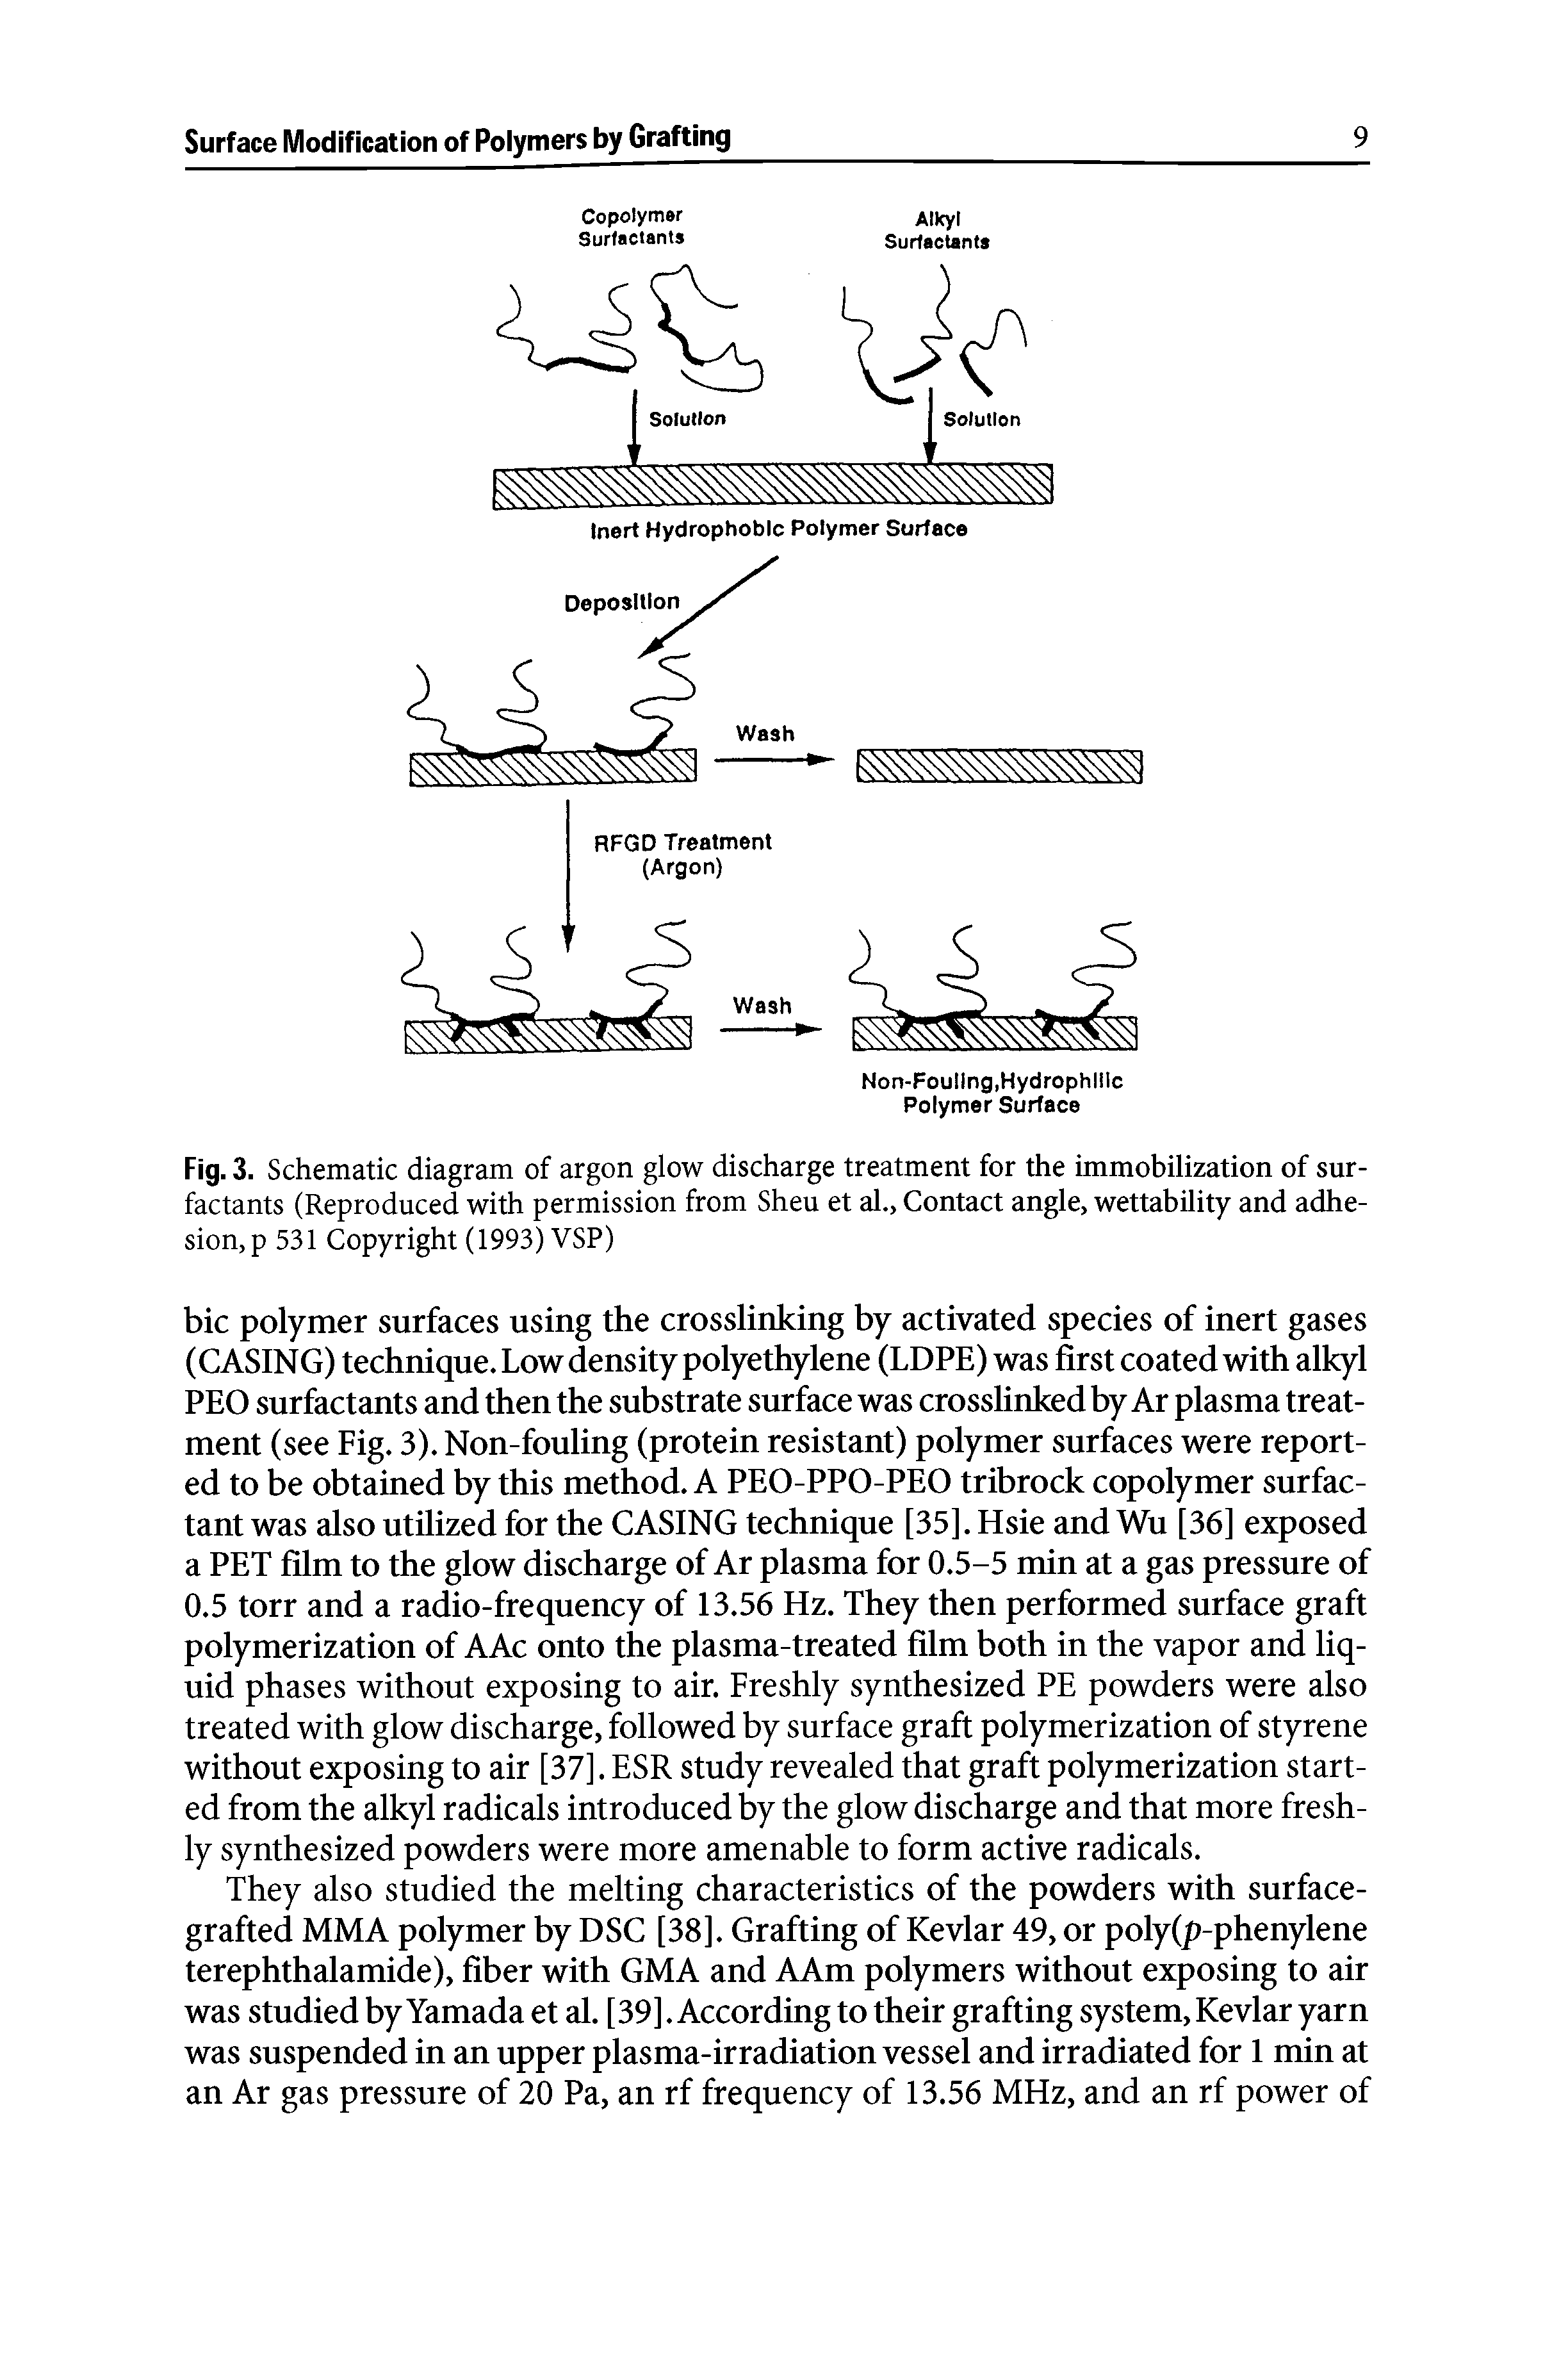 Fig. 3. Schematic diagram of argon glow discharge treatment for the immobilization of surfactants (Reproduced with permission from Sheu et al., Contact angle, wettability and adhesion 531 Copyright (1993) VSP)...